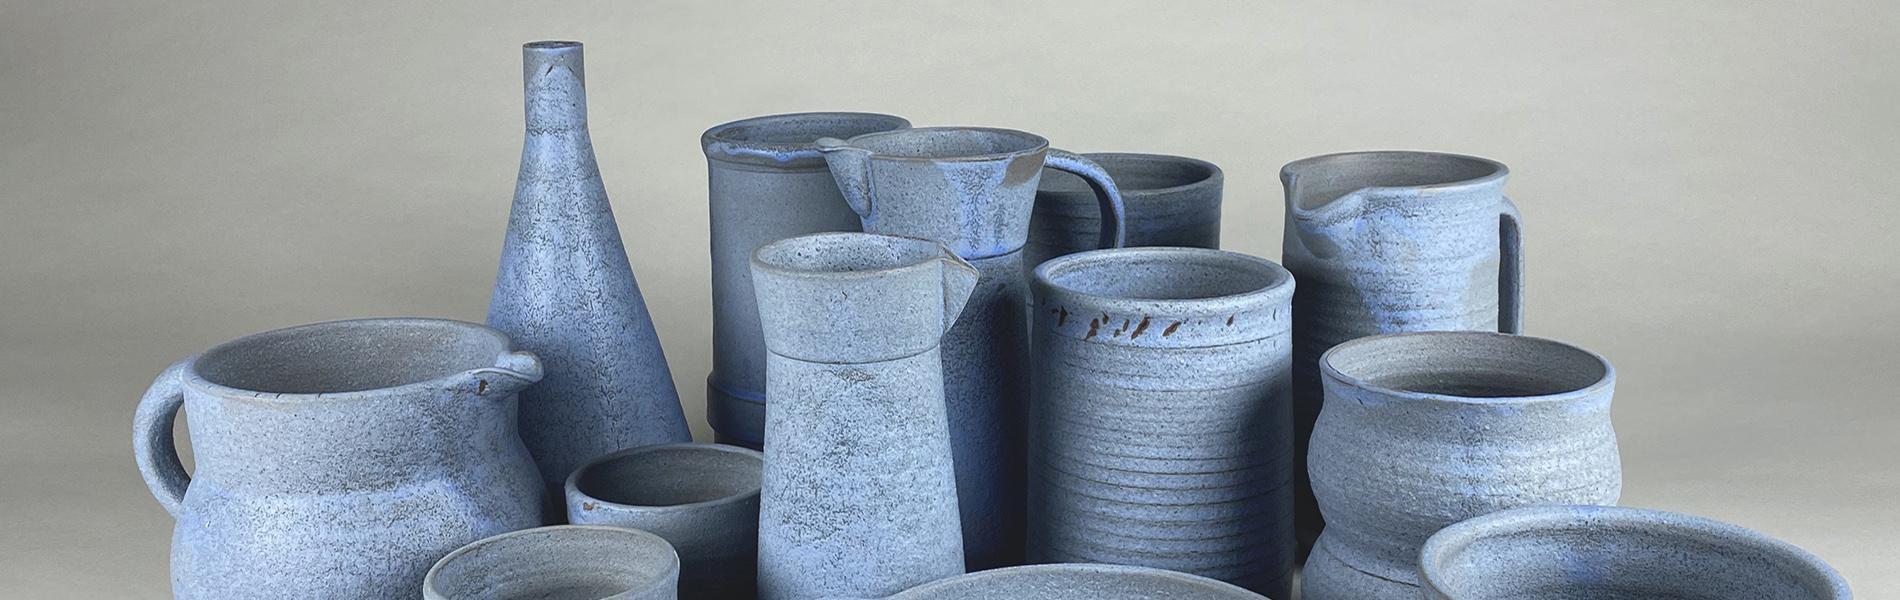 The Ceramics Program offers knowledge, aesthetics, technical approaches and invention through hands-